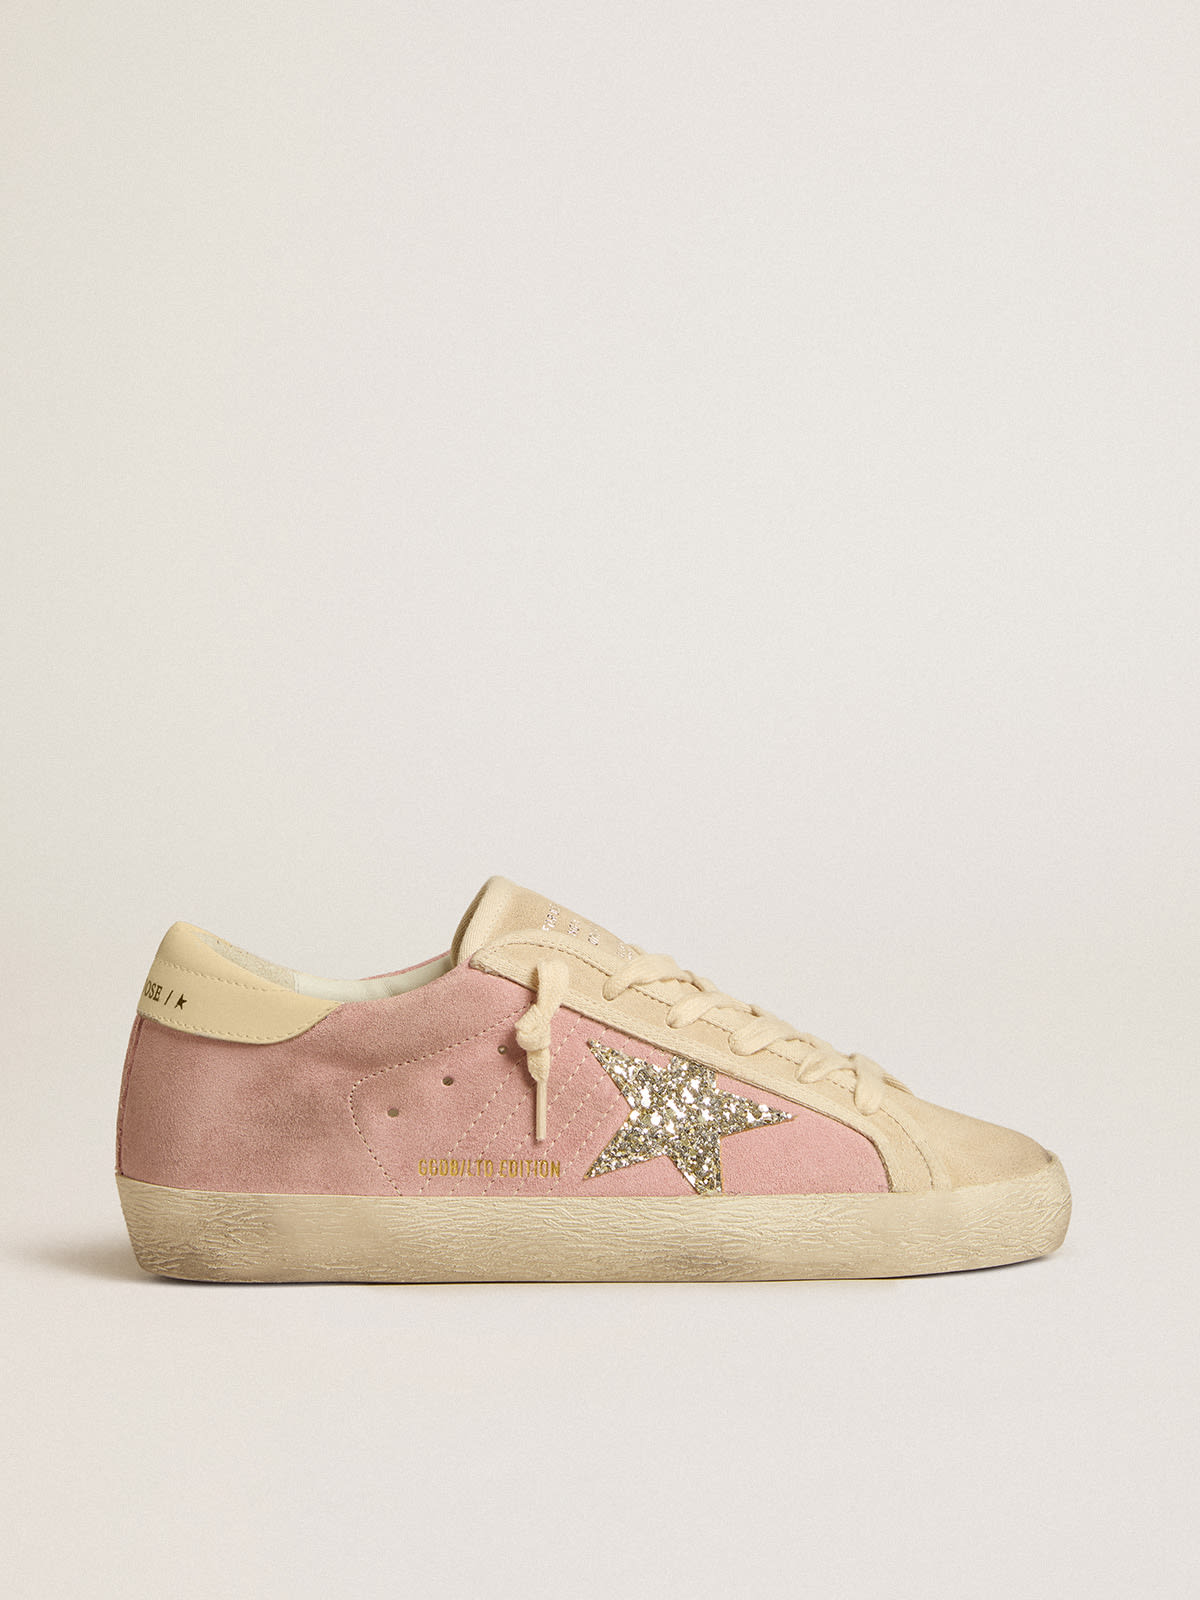 Golden Goose - Super-Star LTD in pink and pearl suede with platinum glitter star in 